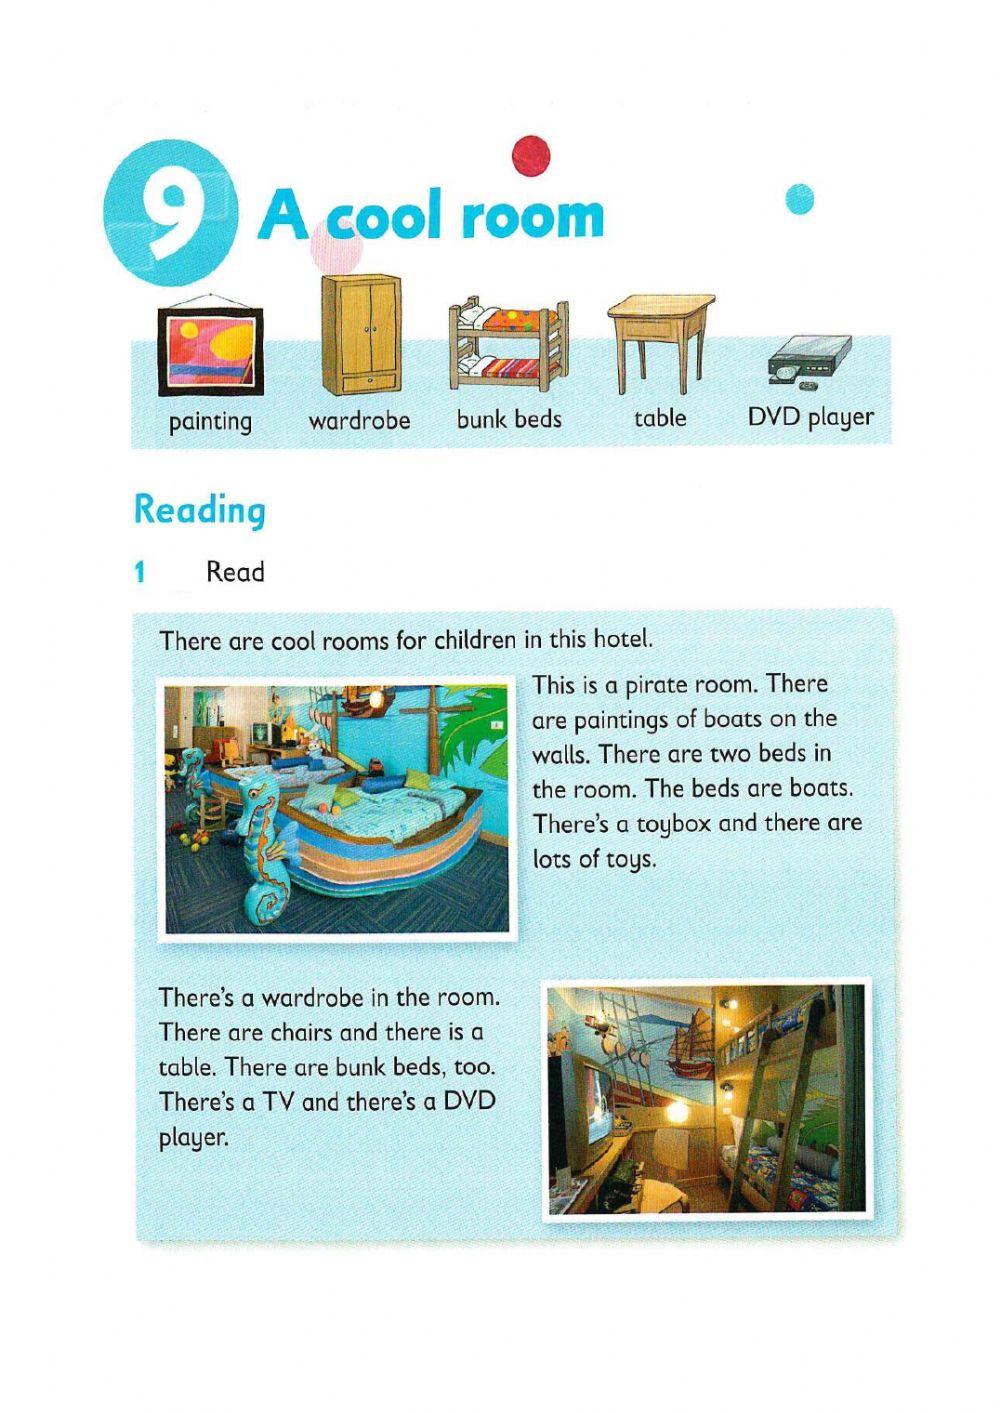 Reading and writing - A cool room